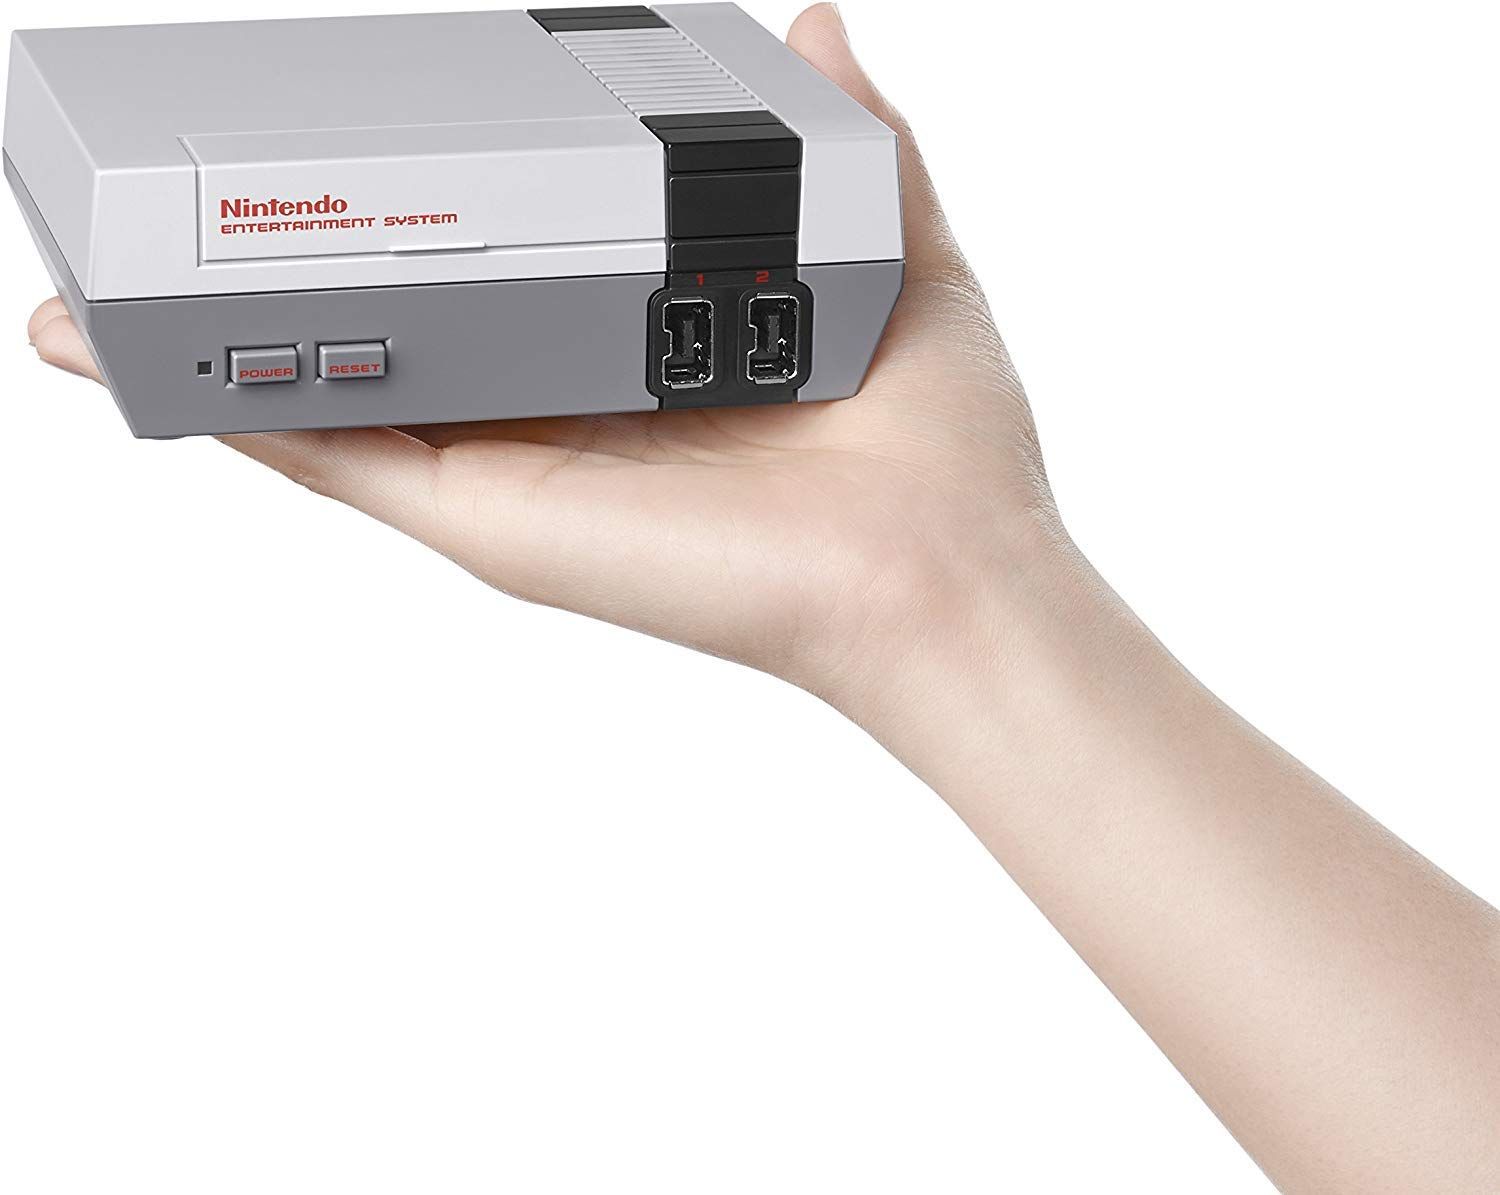 Nintendo Entertainment System in hands